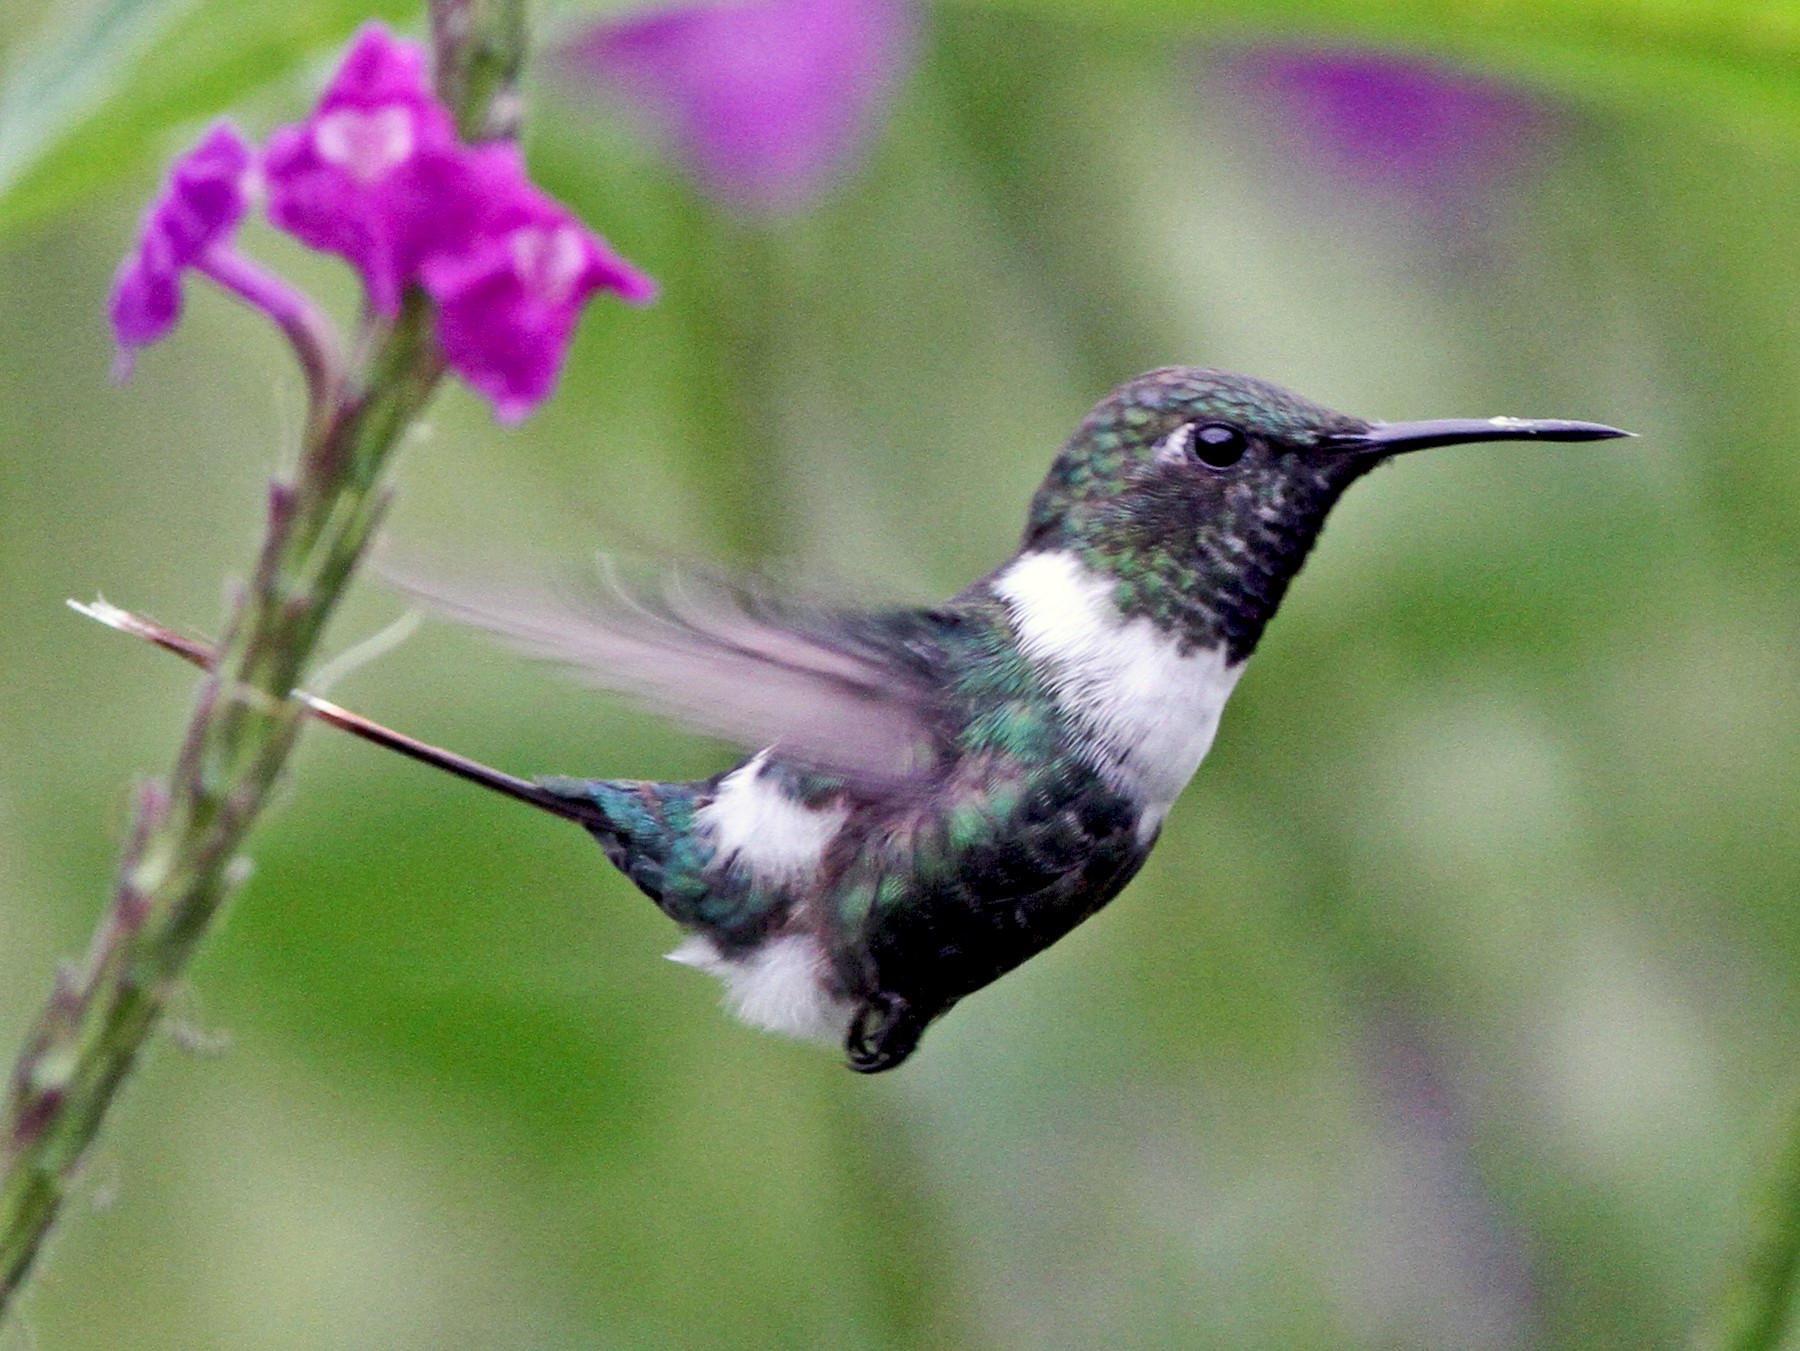 Sparkling-tailed Hummingbird - Georges Duriaux